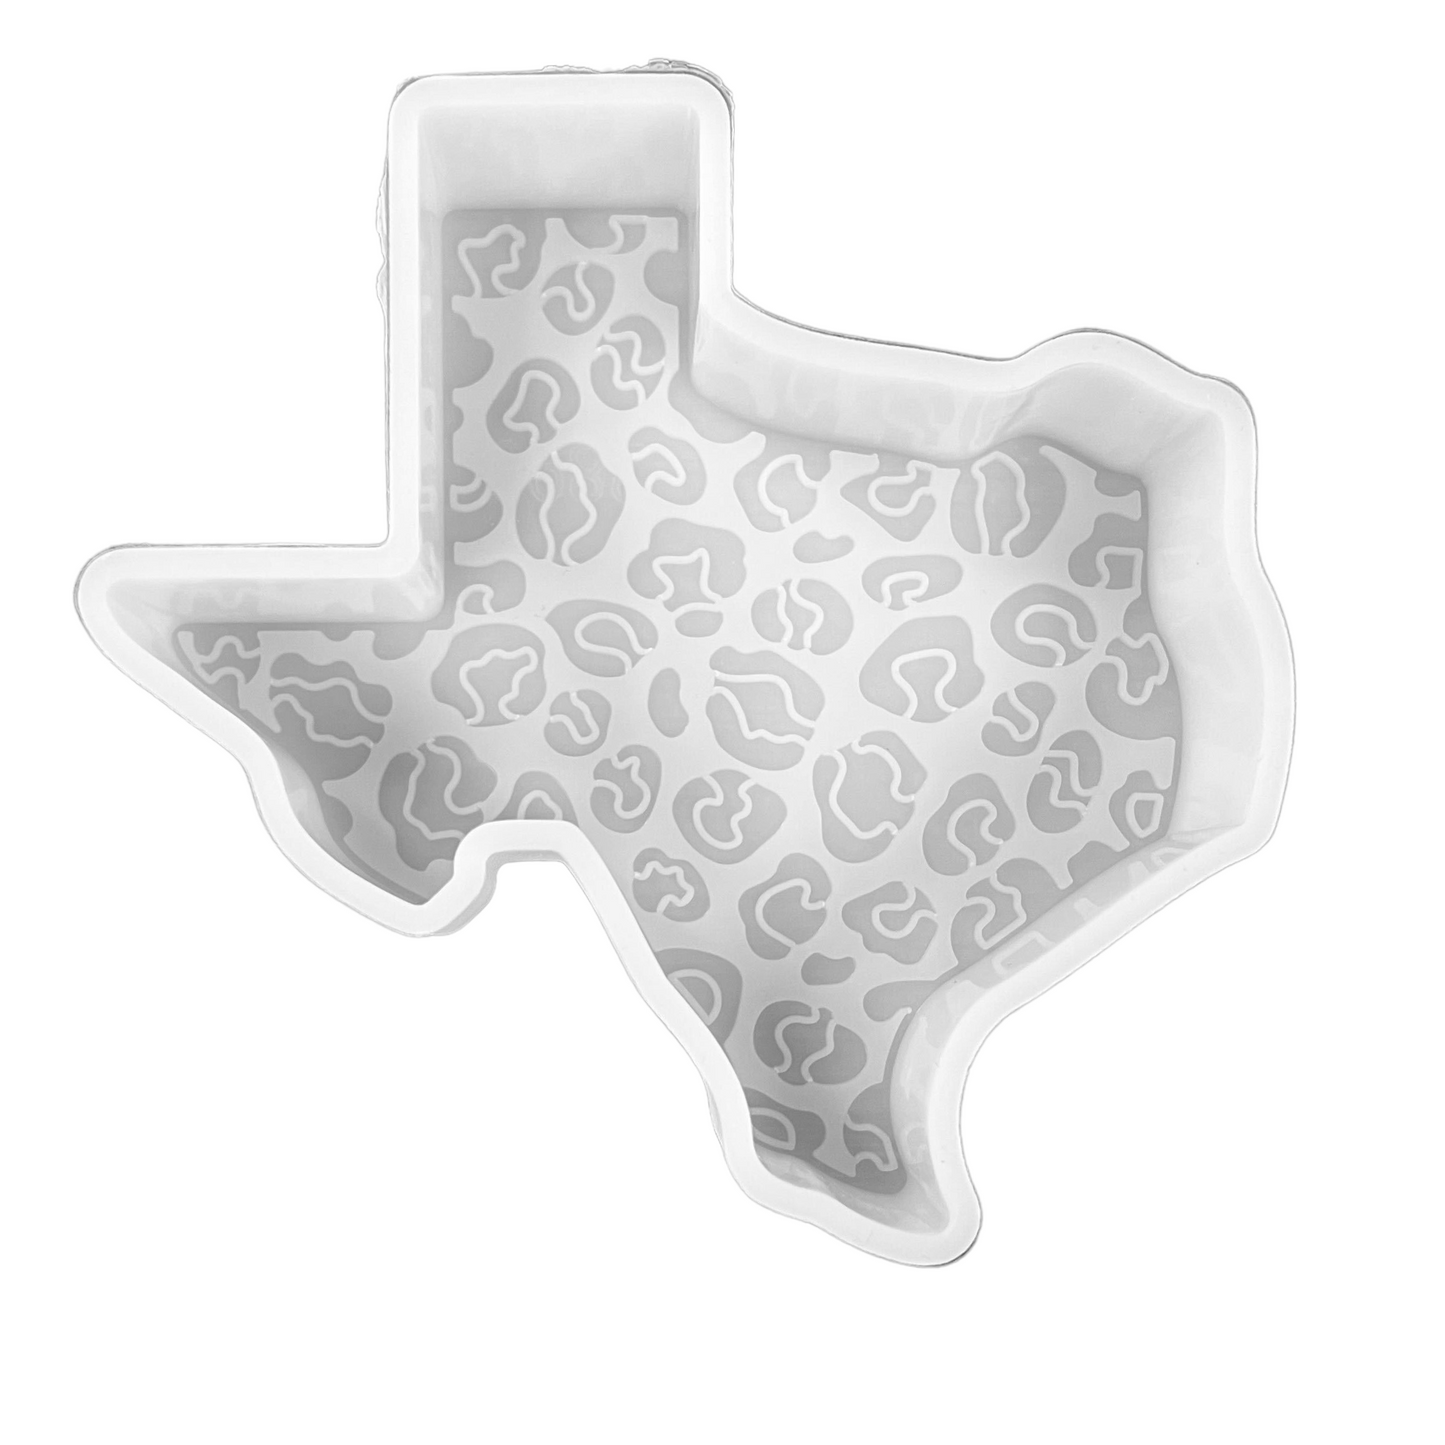 Leopard State of Texas Shaped Silicone Mold